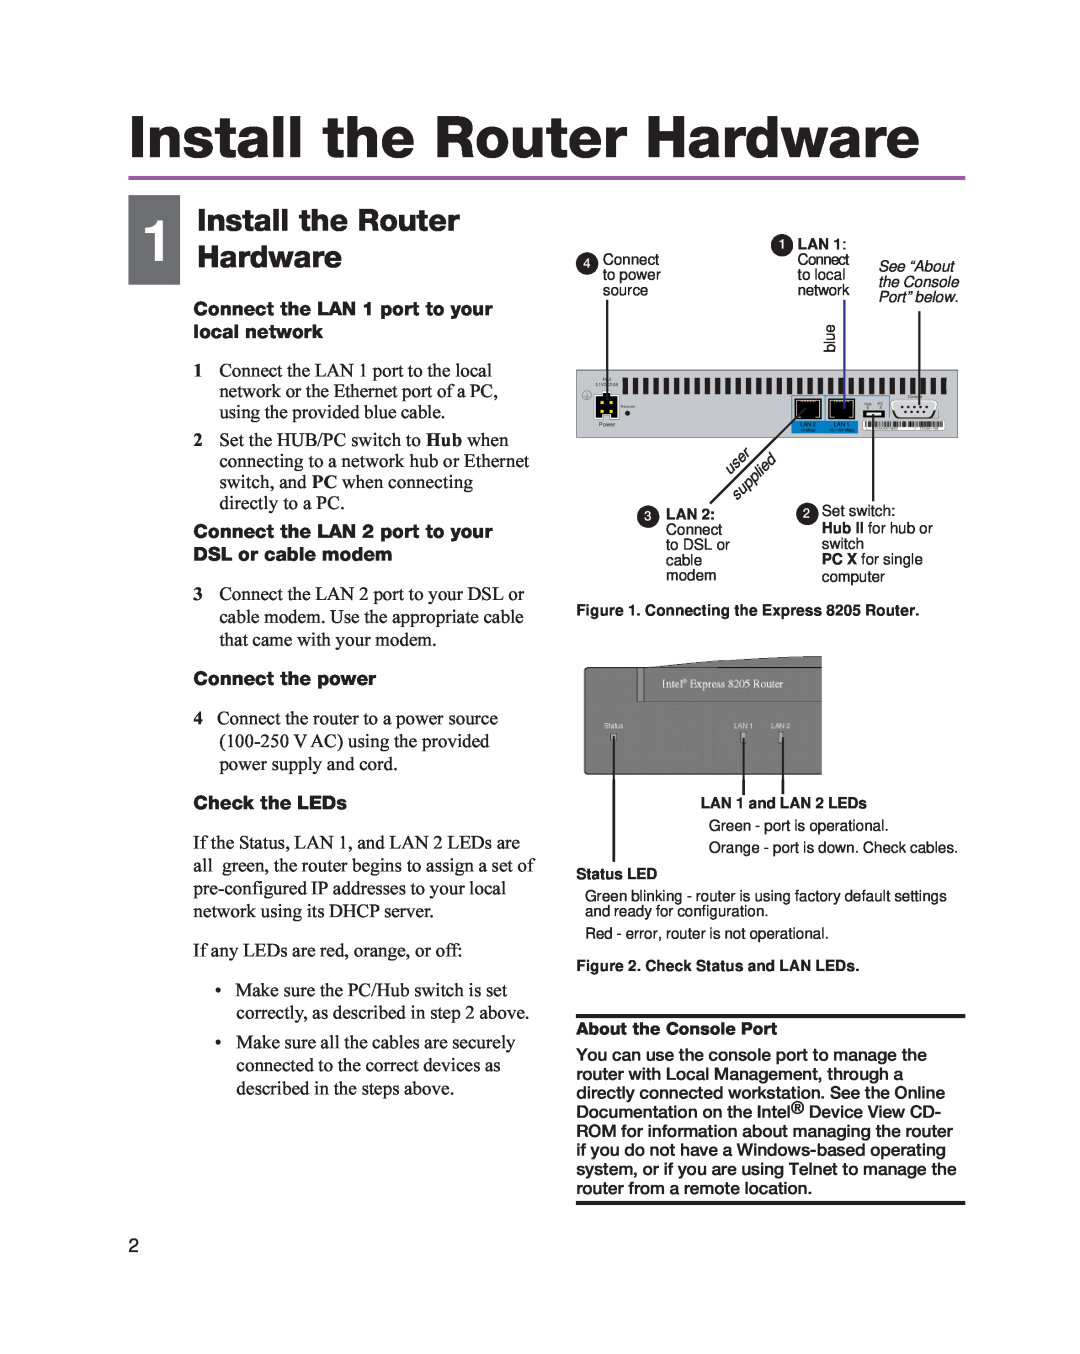 Intel 8205 Install the Router Hardware, Install the Router 1 Hardware, Connect the LAN 1 port to your local network 